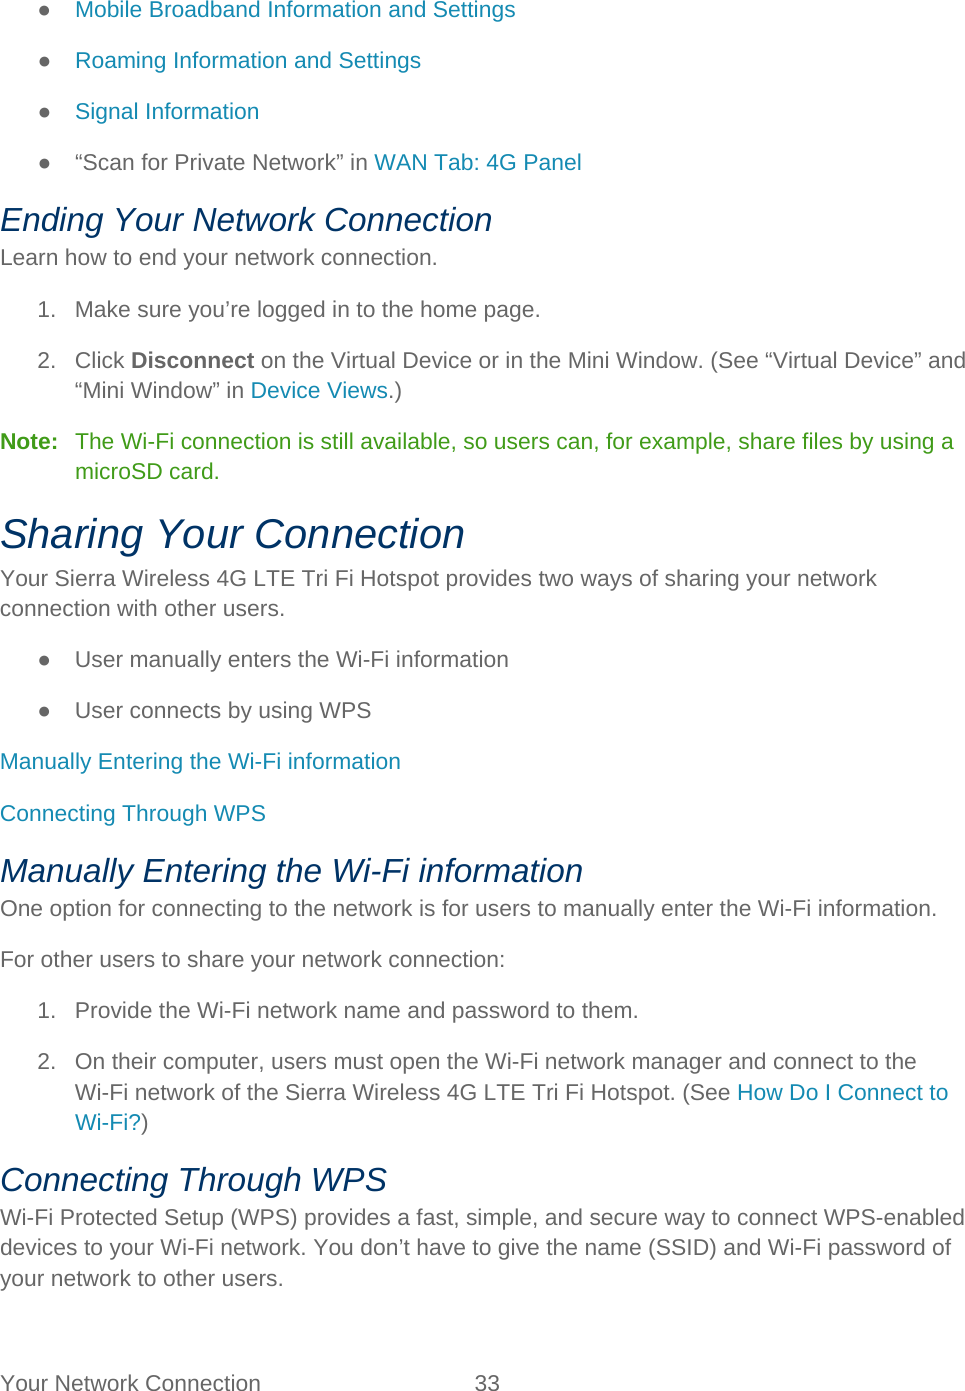 Your Network Connection 33   ● Mobile Broadband Information and Settings ● Roaming Information and Settings ● Signal Information ●  “Scan for Private Network” in WAN Tab: 4G Panel Ending Your Network Connection Learn how to end your network connection. 1. Make sure you’re logged in to the home page. 2. Click Disconnect on the Virtual Device or in the Mini Window. (See “Virtual Device” and “Mini Window” in Device Views.) Note:   The Wi-Fi connection is still available, so users can, for example, share files by using a microSD card. Sharing Your Connection Your Sierra Wireless 4G LTE Tri Fi Hotspot provides two ways of sharing your network connection with other users. ● User manually enters the Wi-Fi information ● User connects by using WPS Manually Entering the Wi-Fi information Connecting Through WPS Manually Entering the Wi-Fi information One option for connecting to the network is for users to manually enter the Wi-Fi information. For other users to share your network connection: 1. Provide the Wi-Fi network name and password to them.  2. On their computer, users must open the Wi-Fi network manager and connect to the Wi-Fi network of the Sierra Wireless 4G LTE Tri Fi Hotspot. (See How Do I Connect to Wi-Fi?) Connecting Through WPS Wi-Fi Protected Setup (WPS) provides a fast, simple, and secure way to connect WPS-enabled devices to your Wi-Fi network. You don’t have to give the name (SSID) and Wi-Fi password of your network to other users. 